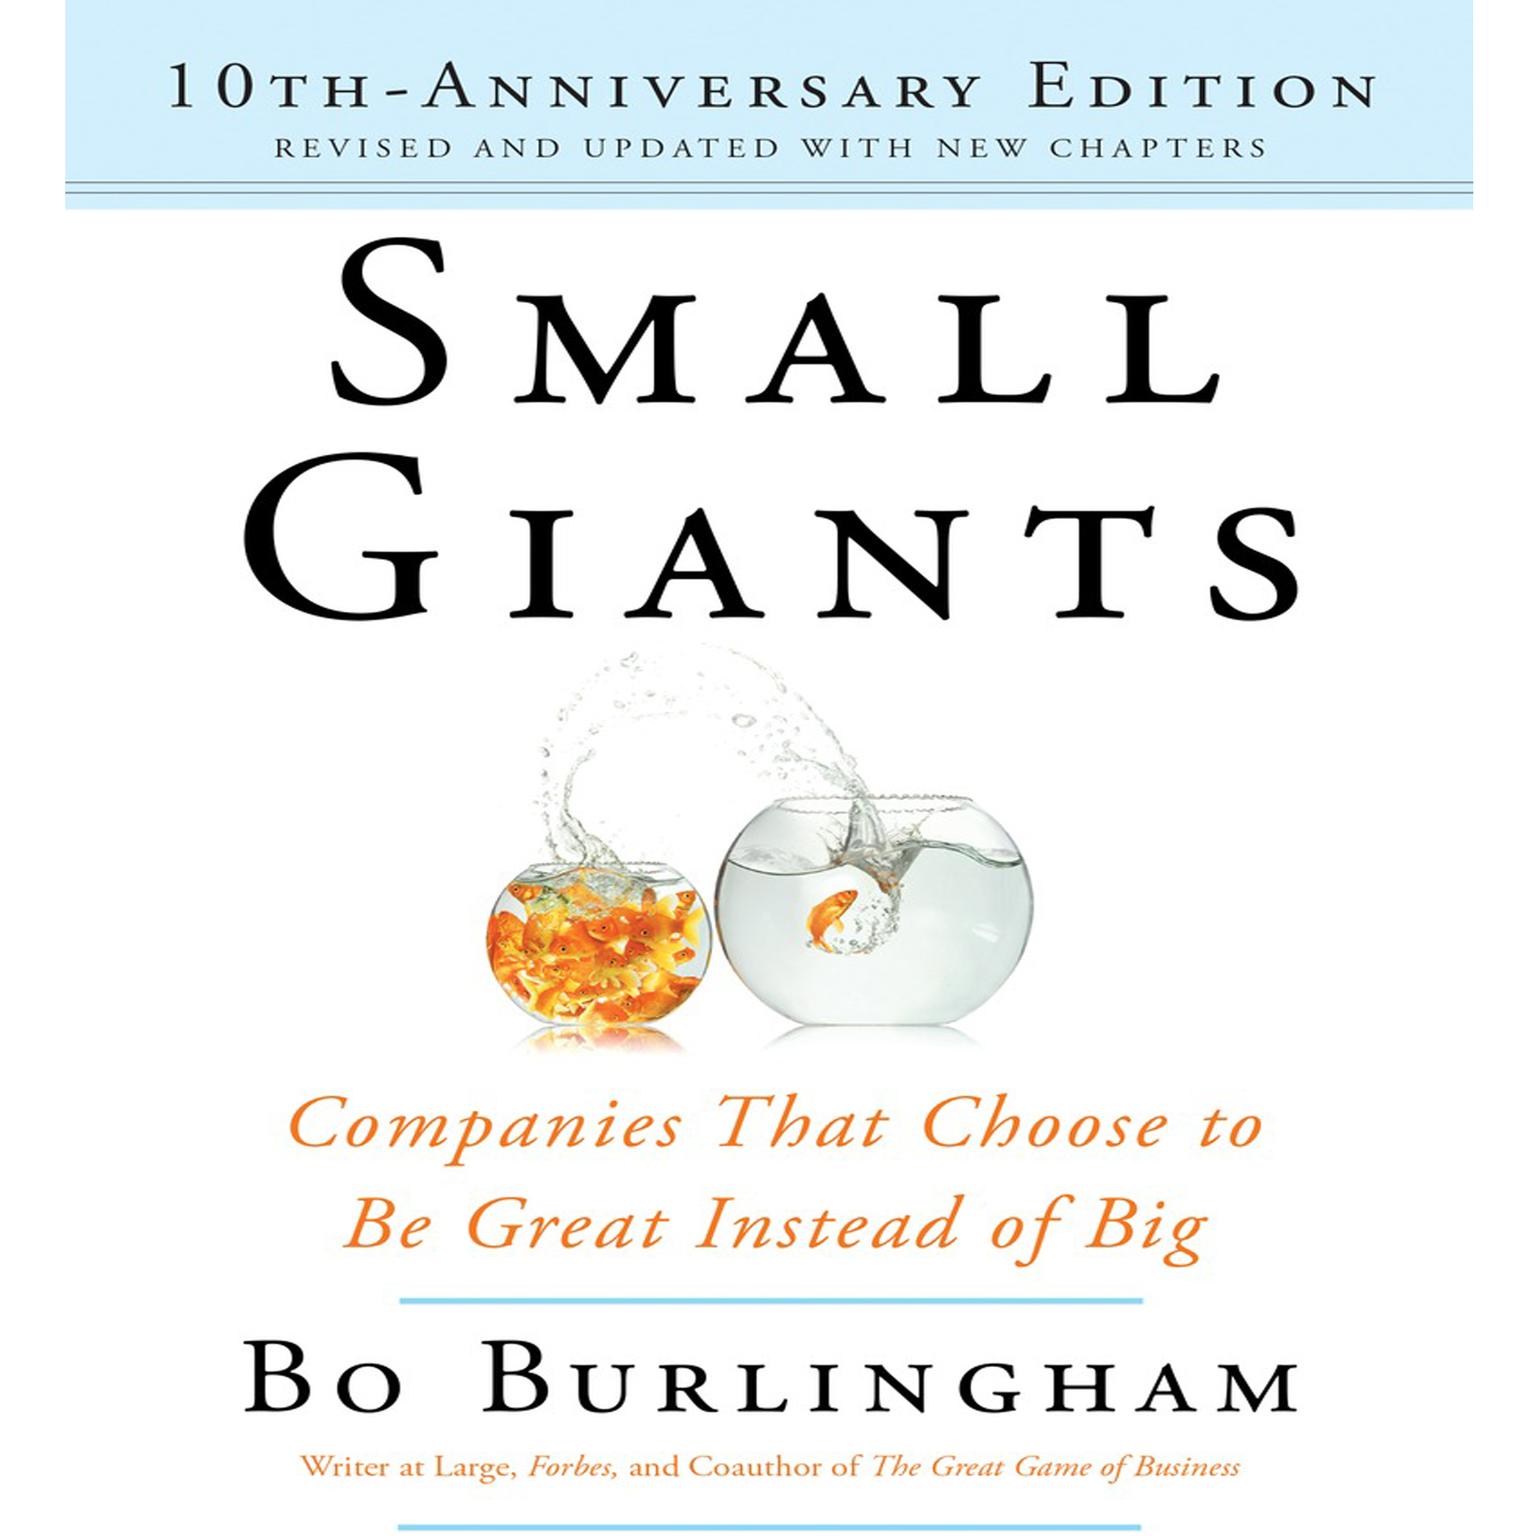 Small Giants: Companies That Choose to Be Great Instead of Big, 10th-Anniversary Edition Audiobook, by Bo Burlingham